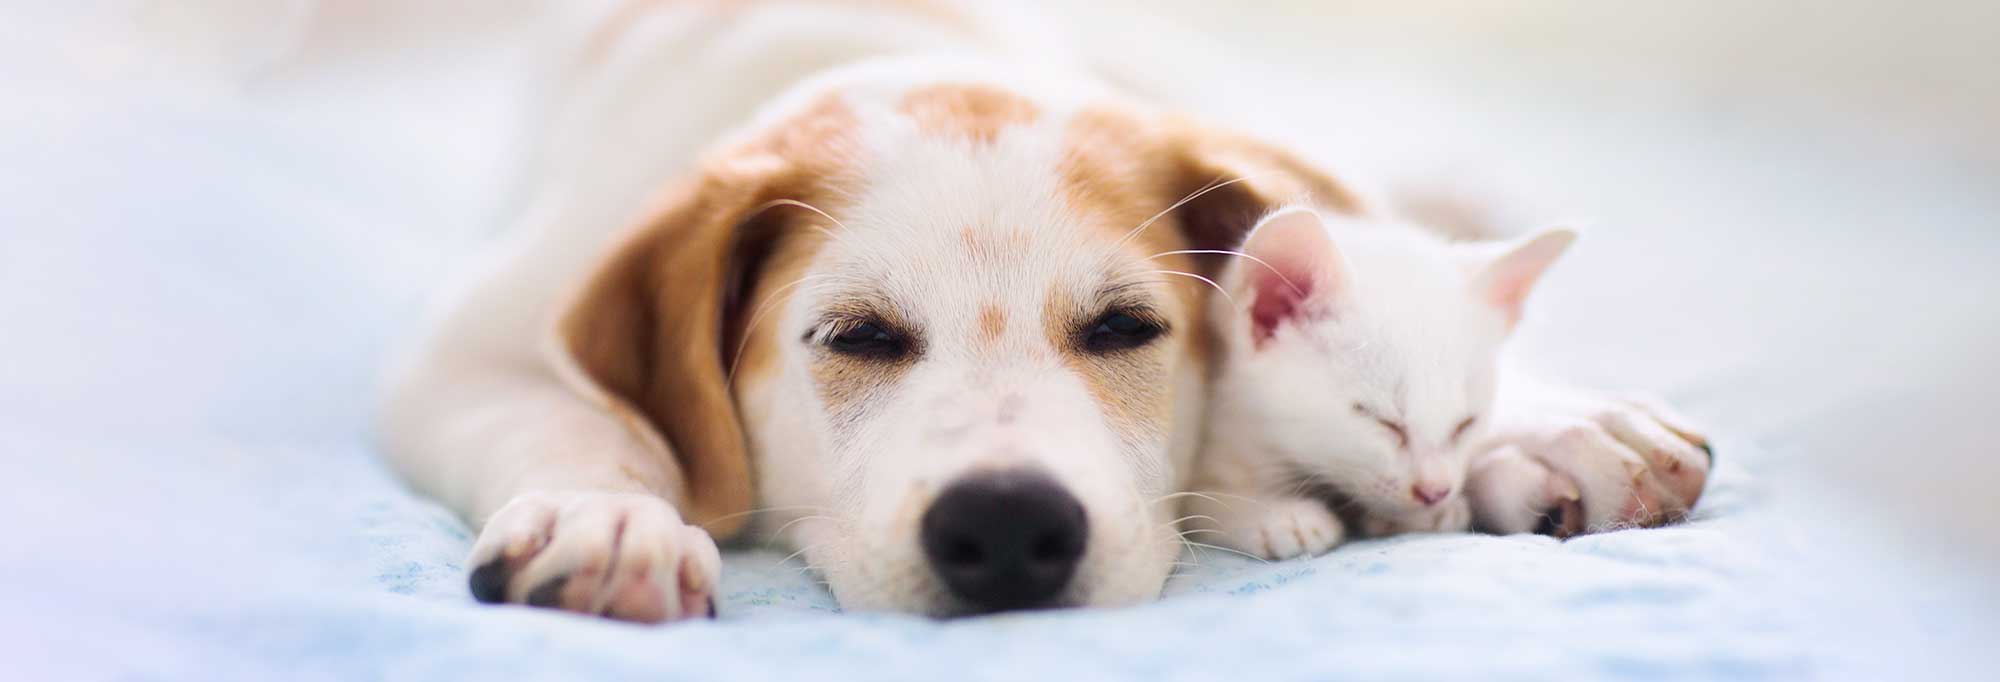 A dog and cat sleeping